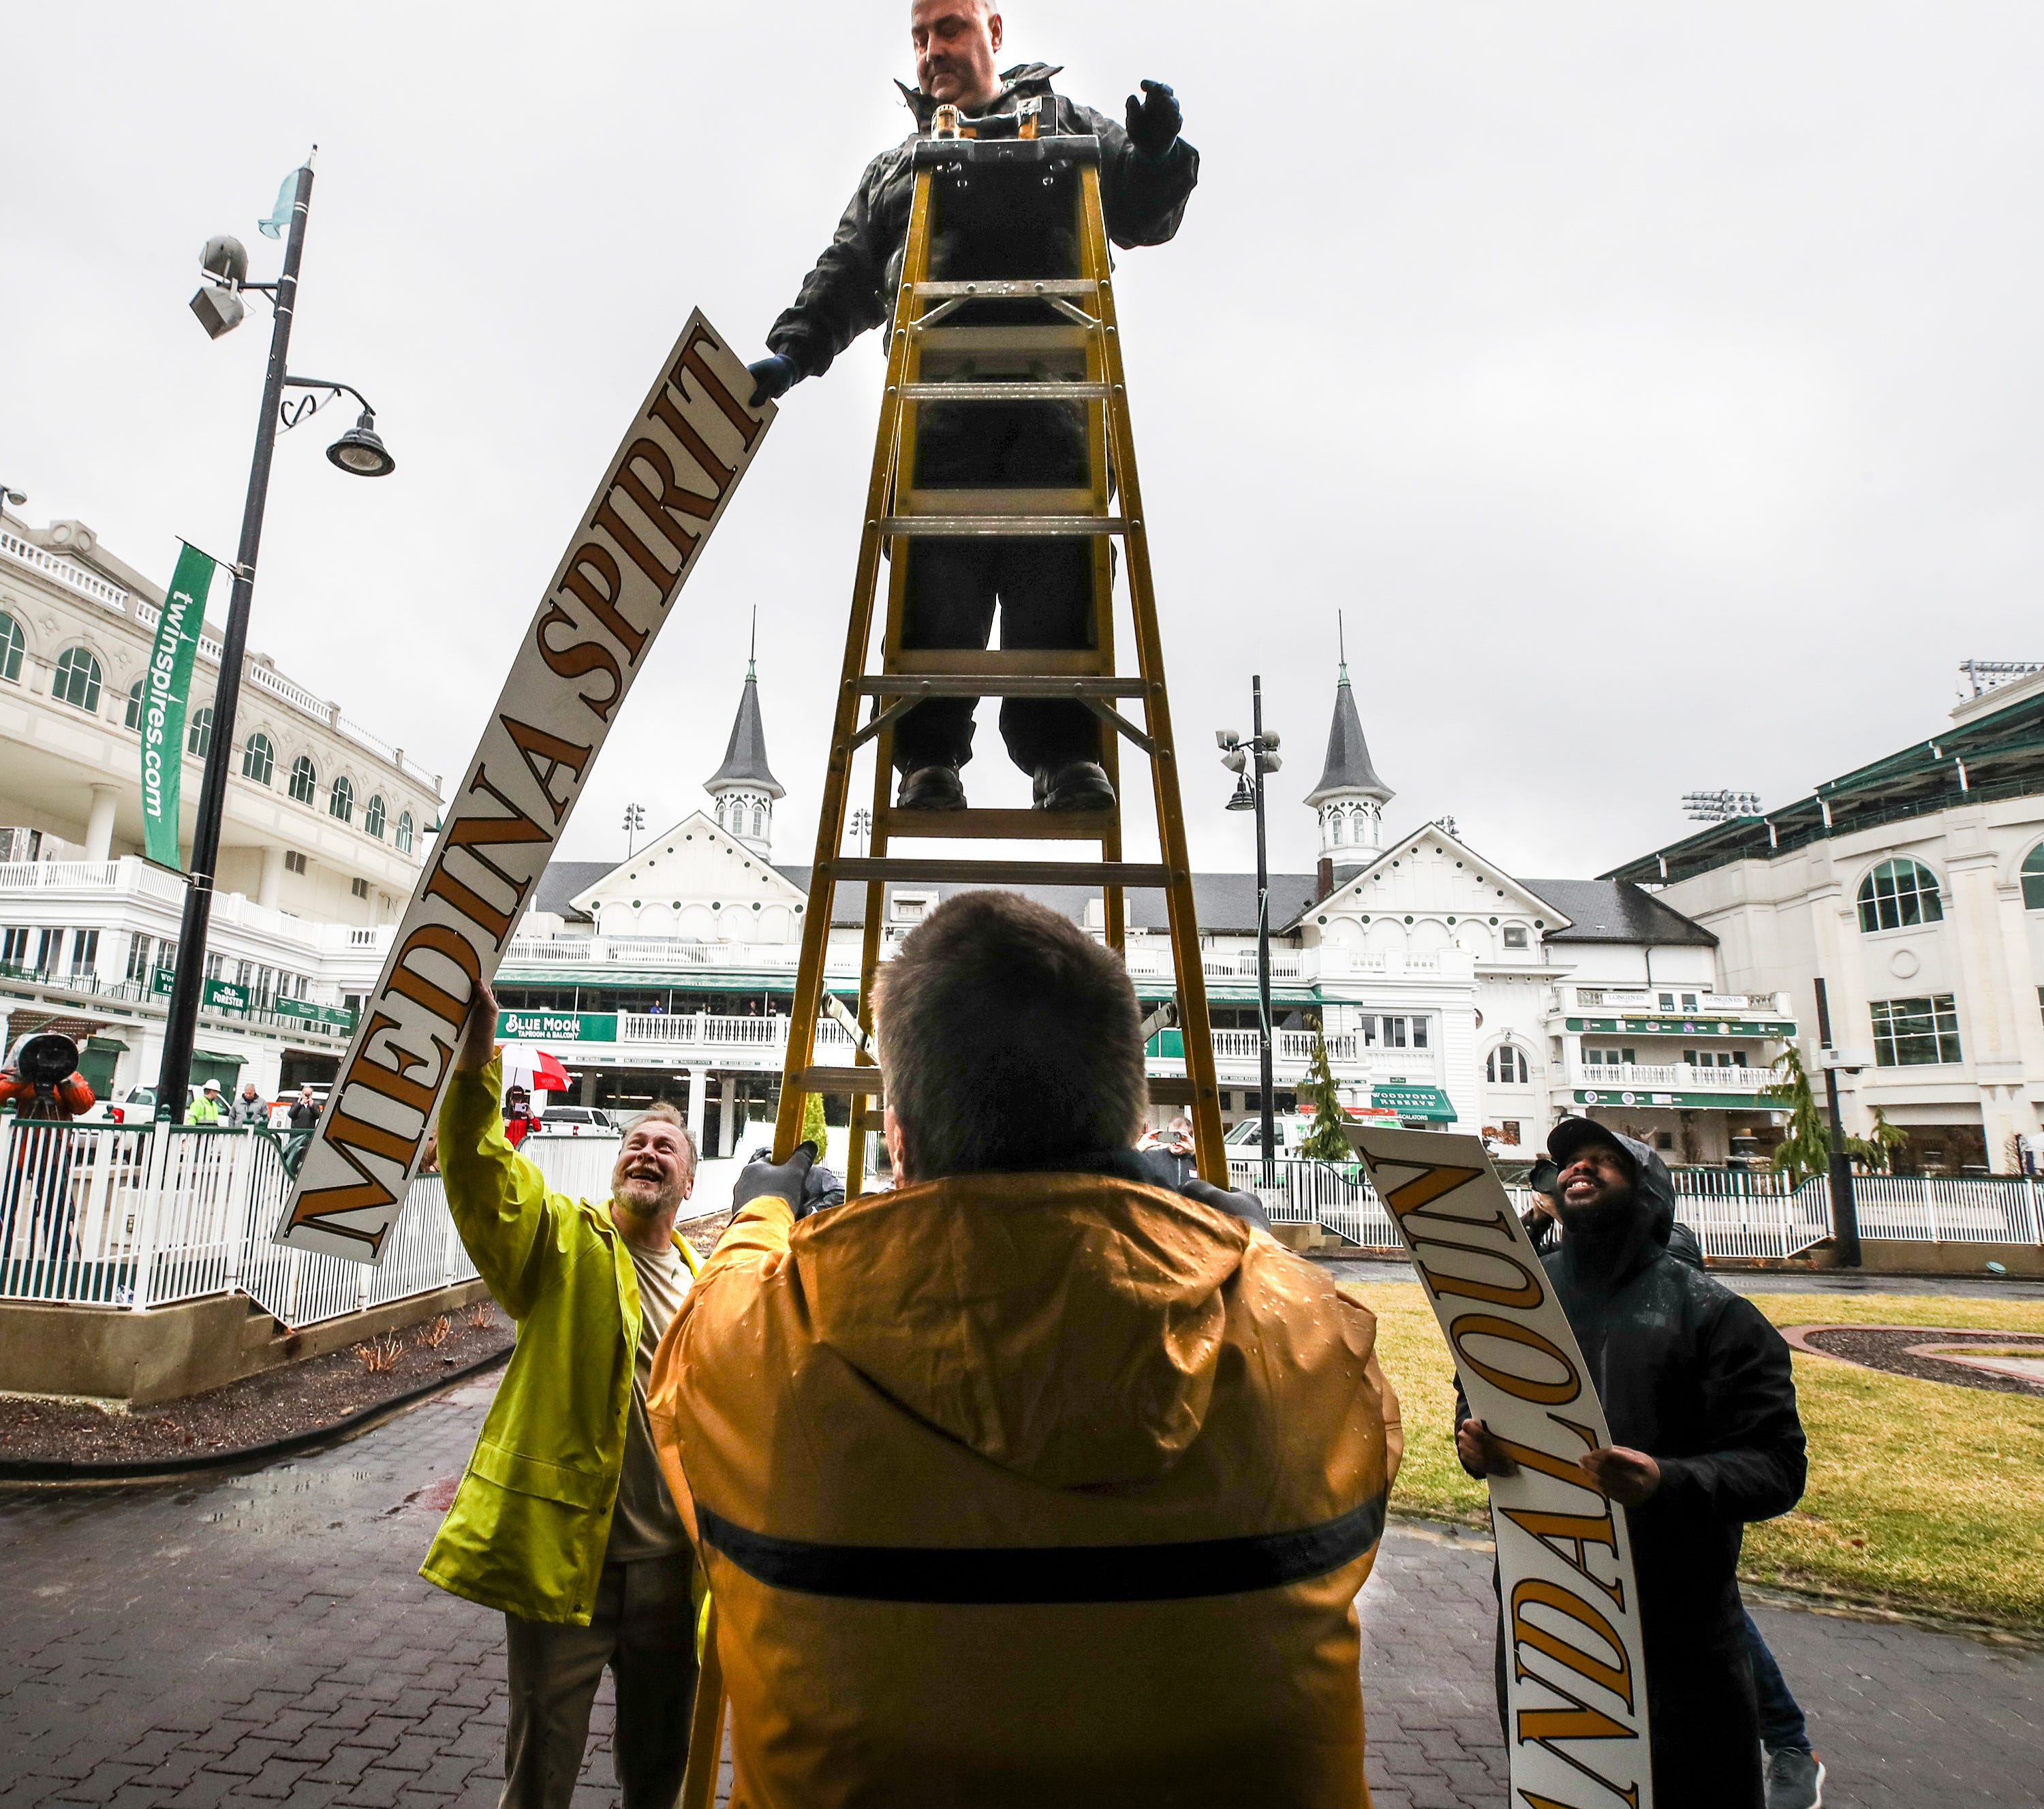 Todd Herl of the Churchill Downs sign shop removes the name of Medina Spirit in the paddock at Churchill Downs on Tuesday, February 22, 2022, in Louisville, Kentucky.  Medina Spirit, trained by Bob Baffert, was disqualified as the winner of the Kentucky Derby 2021 and Mandaloun, trained by Brad Cox, was declared the winner.